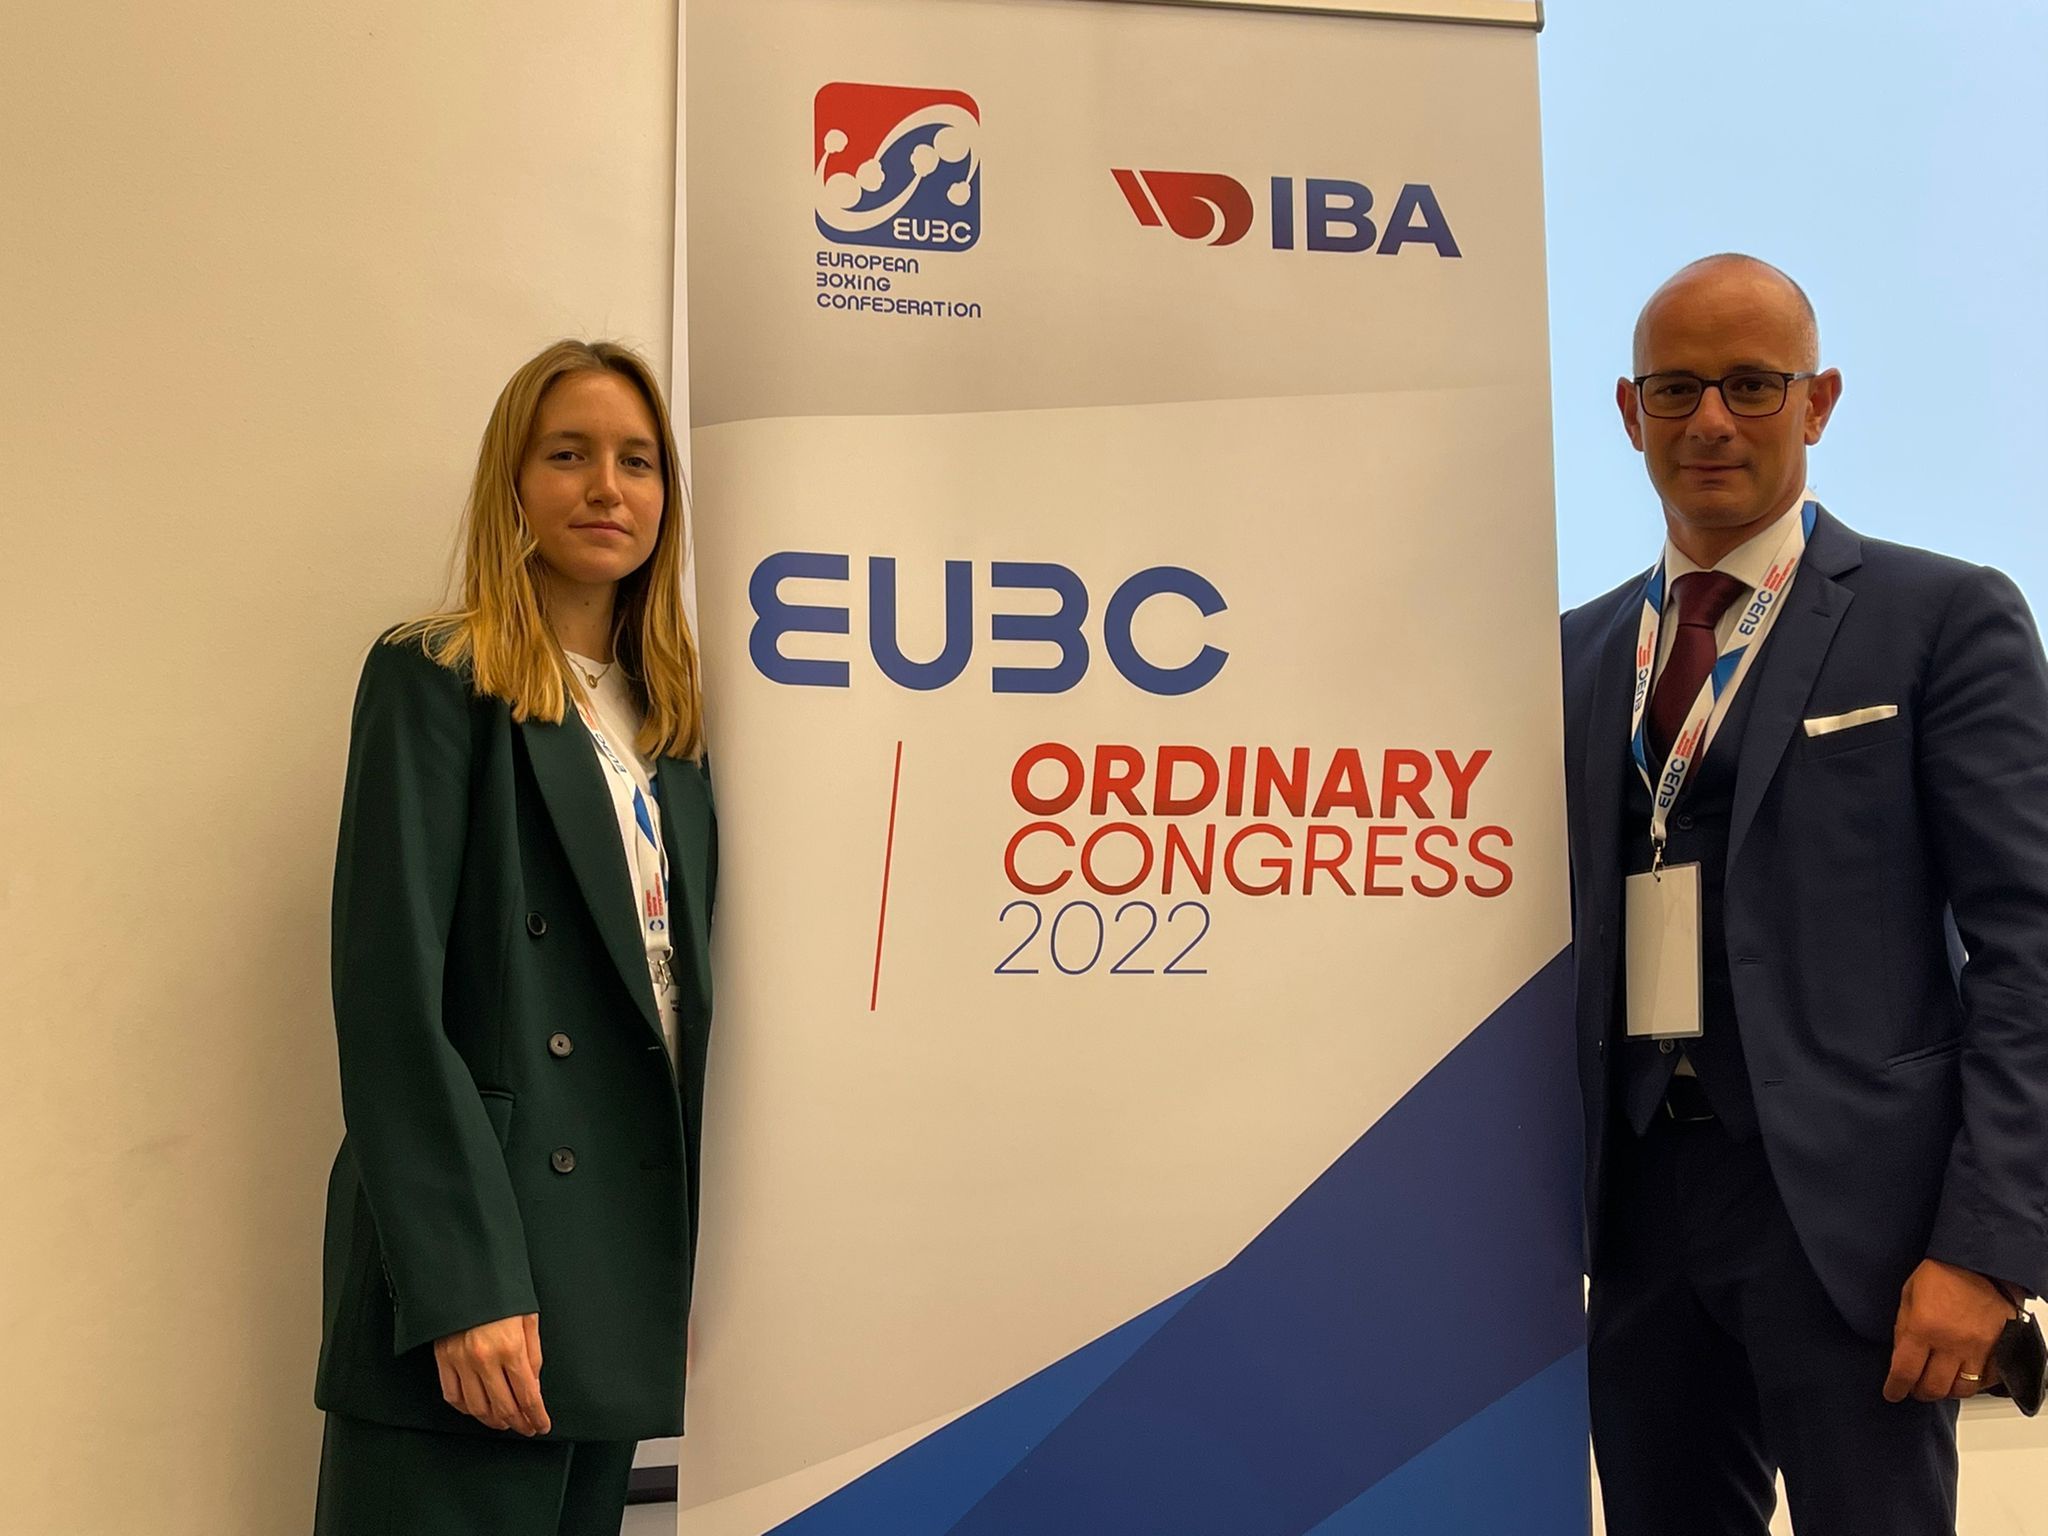 You are currently viewing isportlaw rendered its legal services at the EUBC Congress (Assisi – ITA)